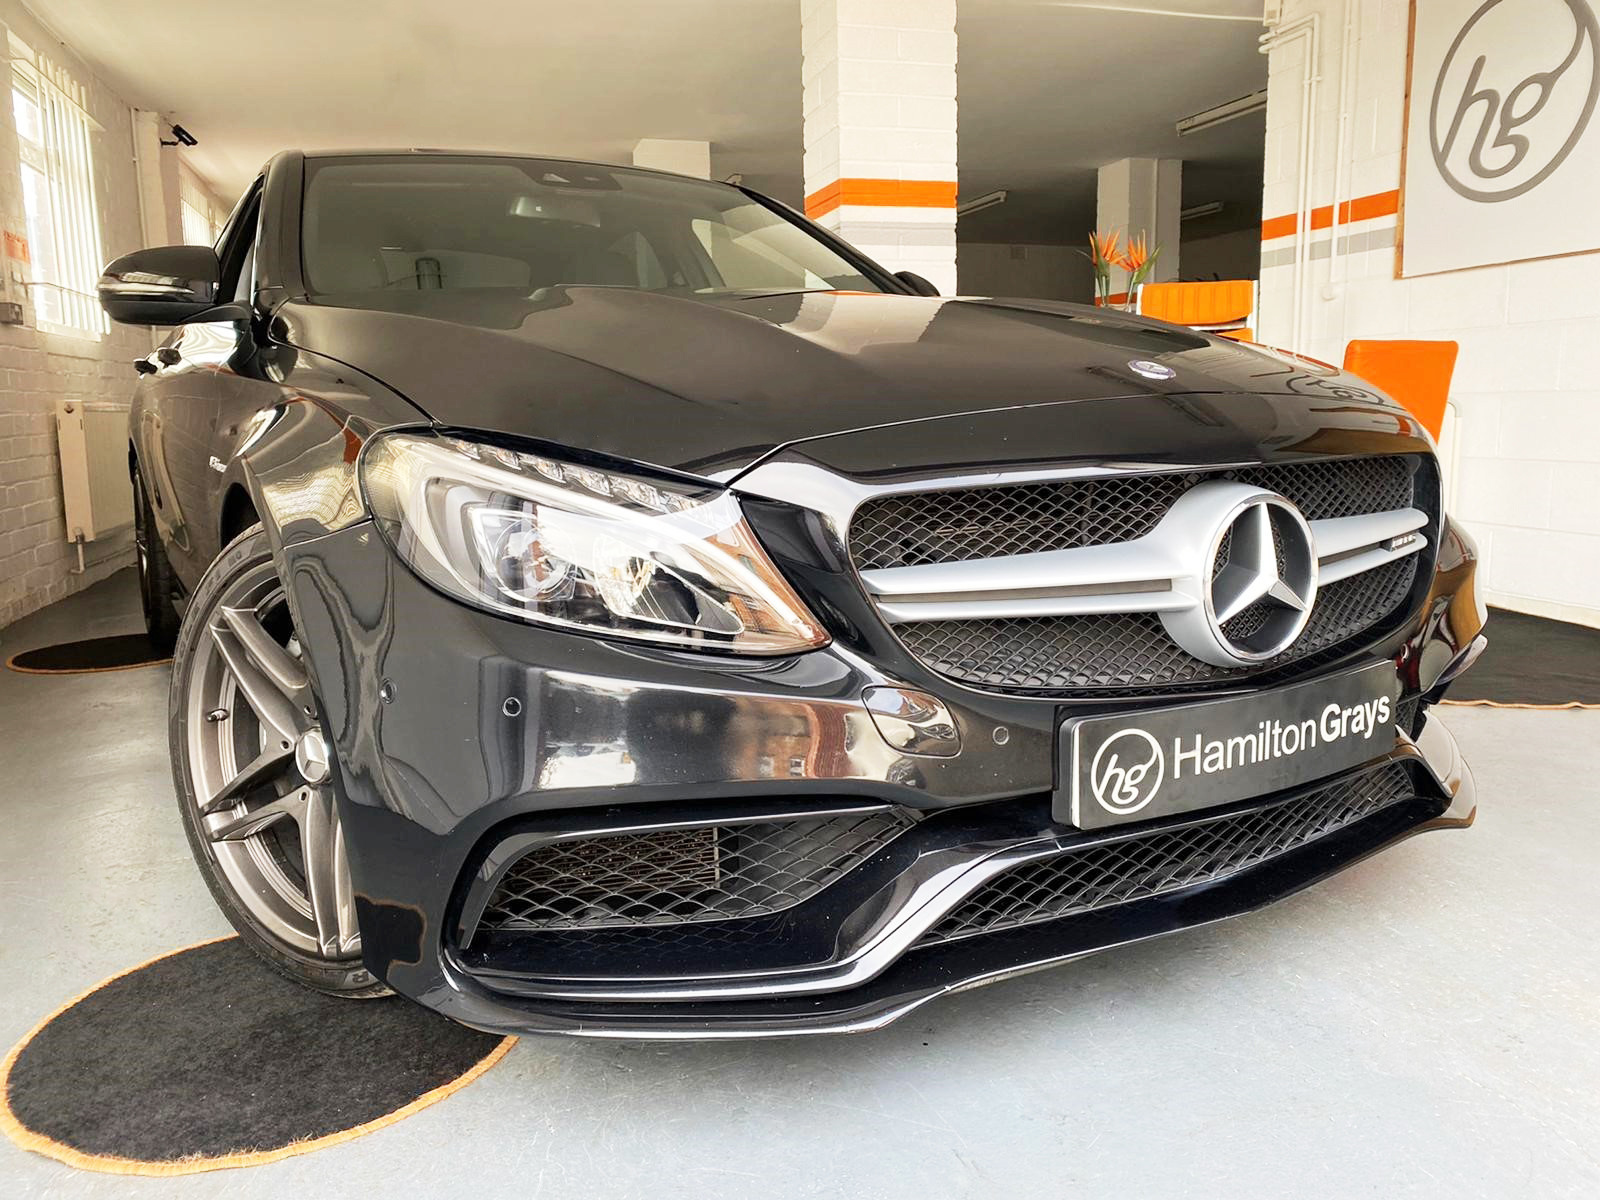 2017 (66) Mercedes-Benz C Class C63 4.0 V8 BiTurbo AMG MCT. In Black with Full Black Leather Interior. Just 16k.. FSH. Great Spec’ (SOLD)